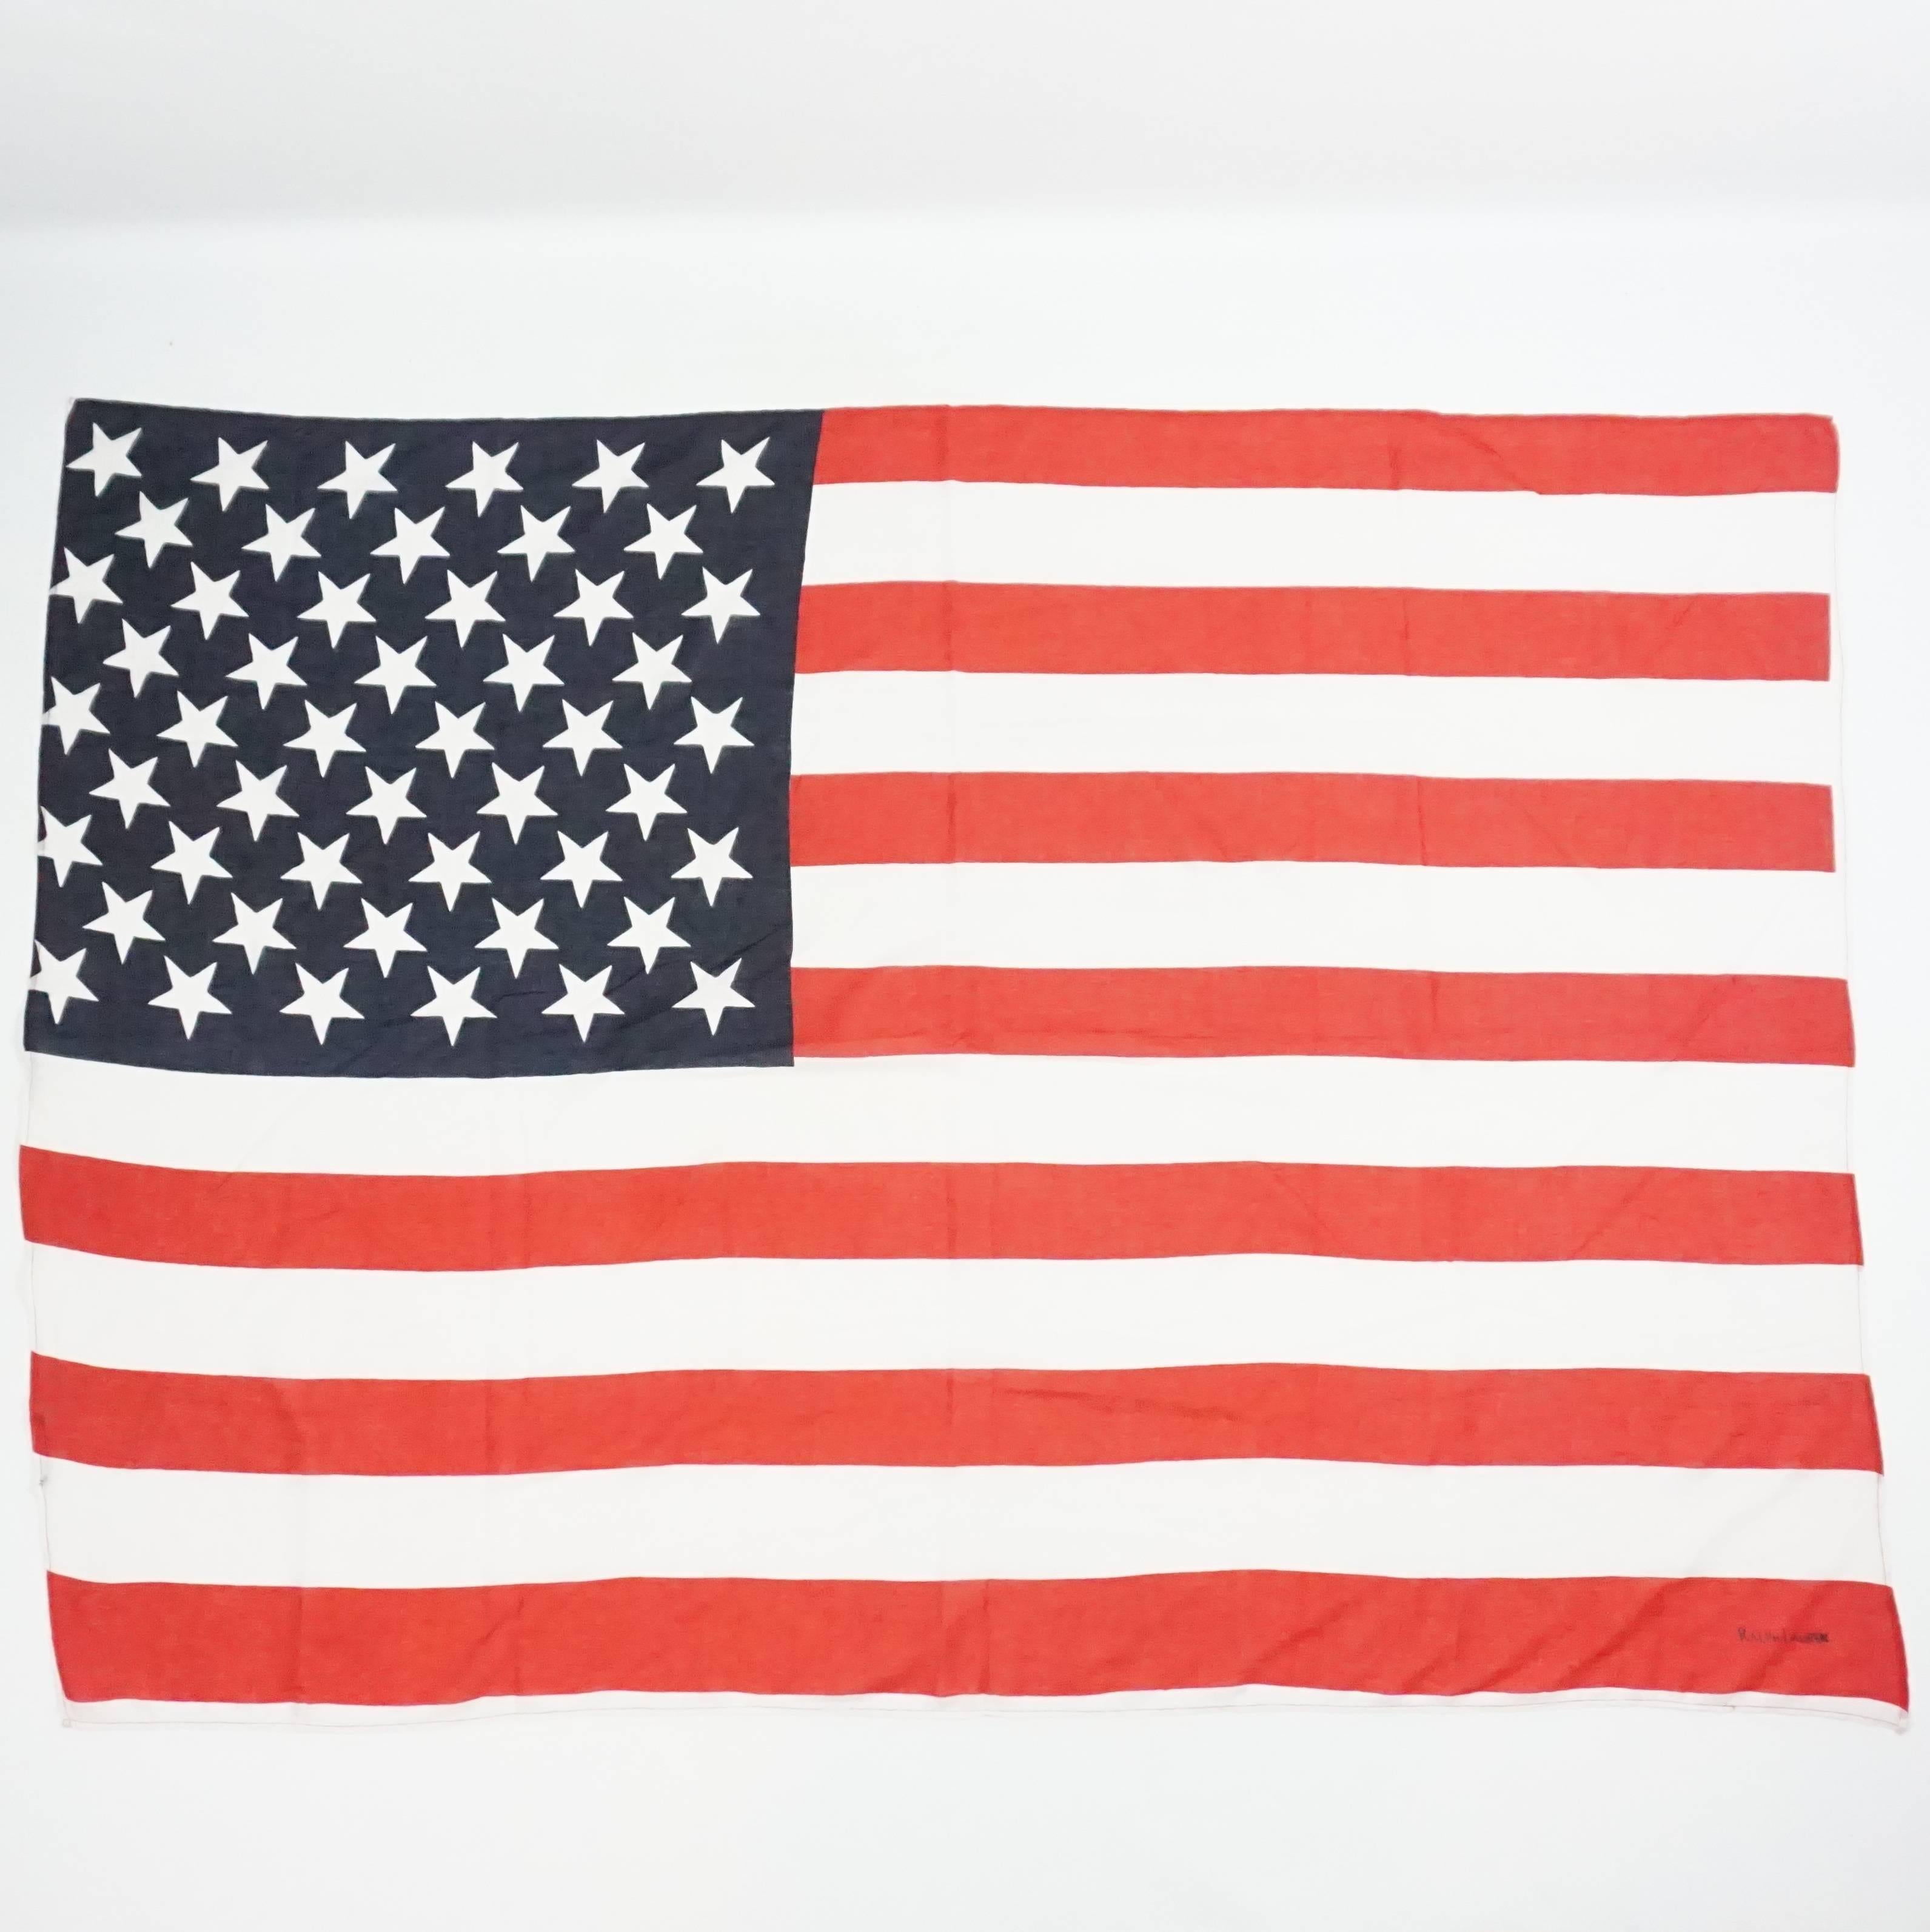 This Ralph Lauren American Flag scarf is red, white, and blue. It features the 13 stripes and 50 stars that the real flag has. This scarf is in good condition with some wear (a hole and staining). 

Measurements
Length:
Width: